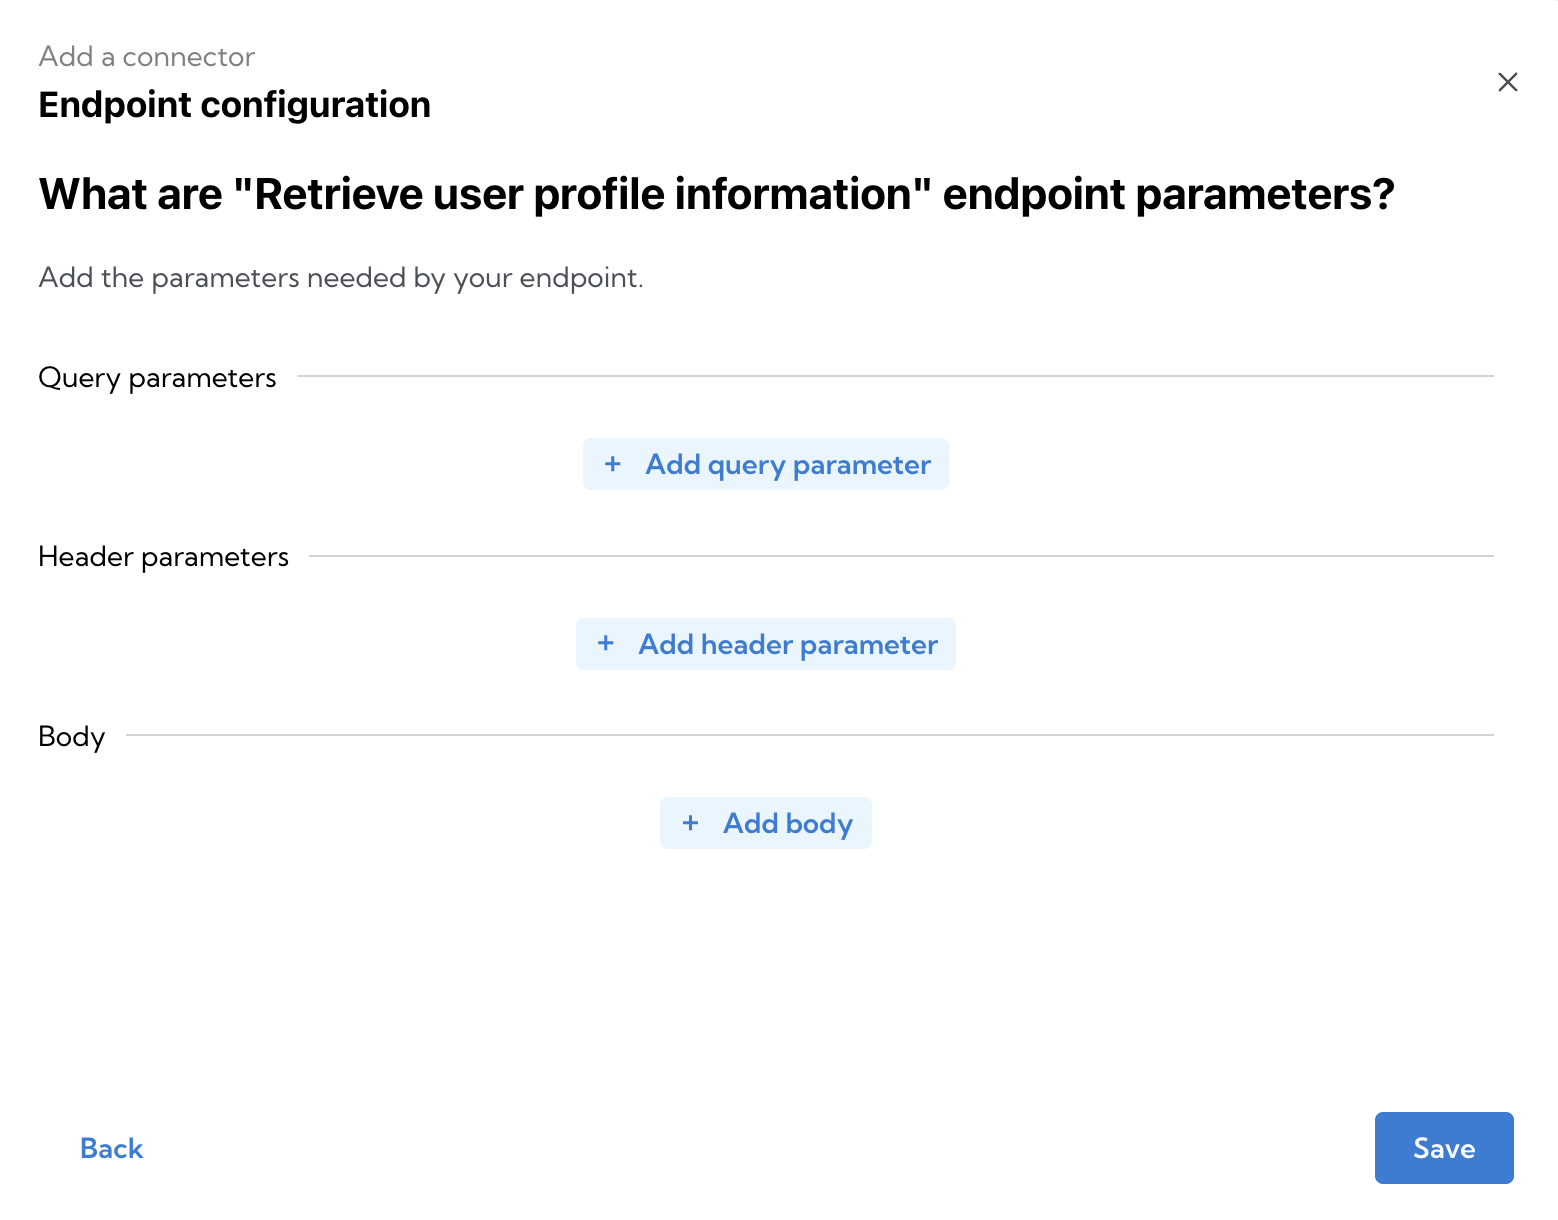 Add the endpoint parameters information